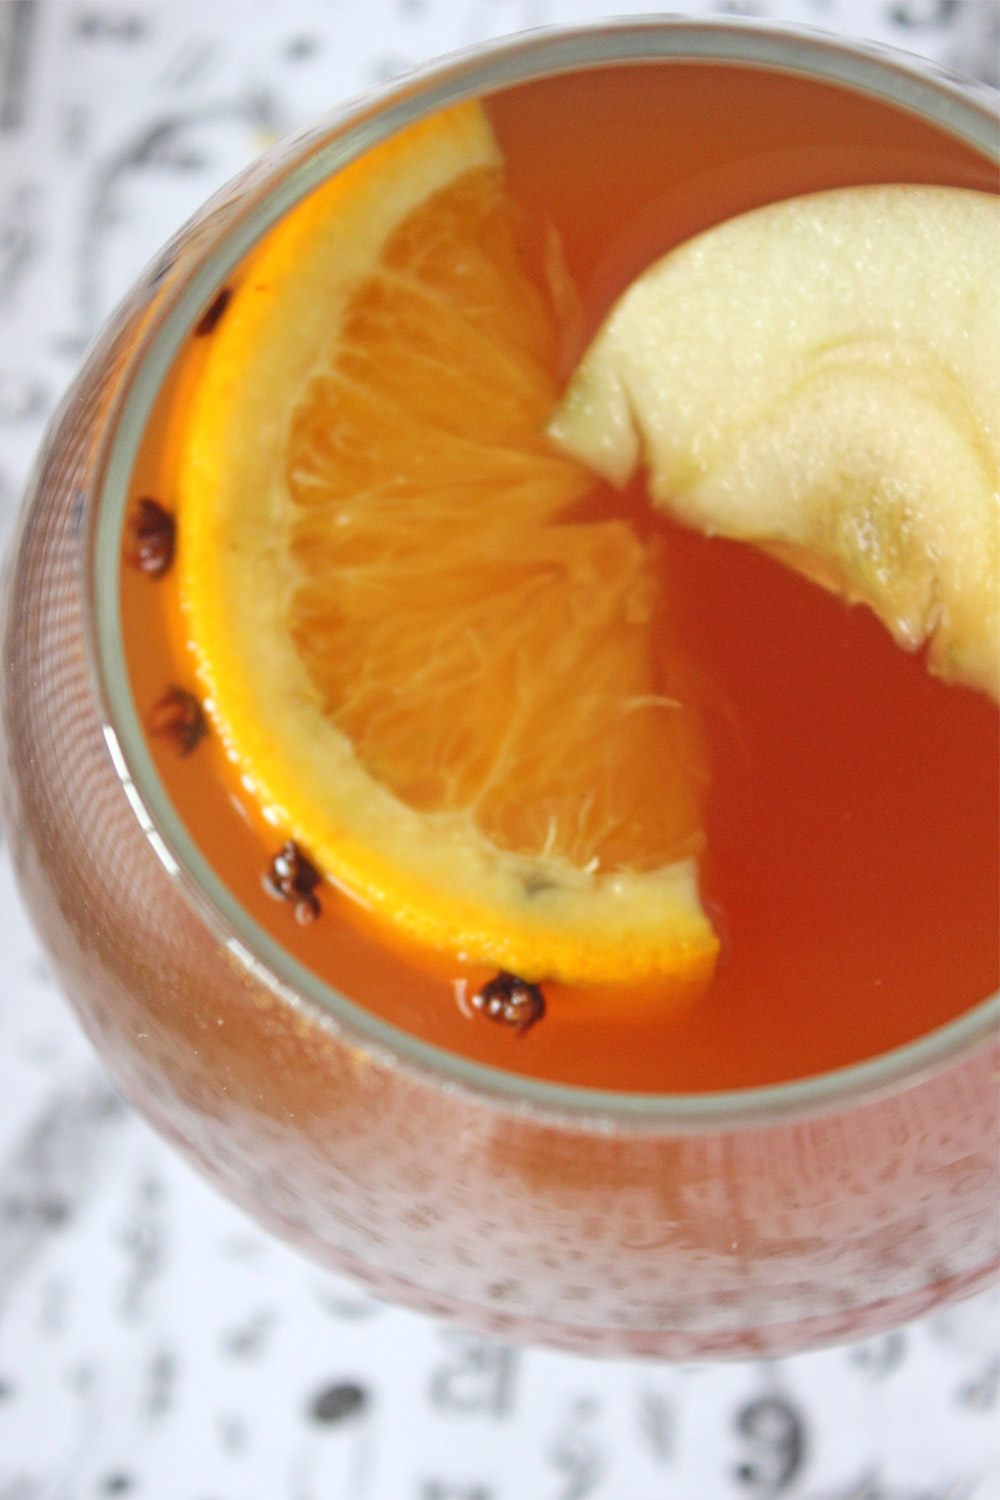 You can make wassail in the crockpot or on the stove top